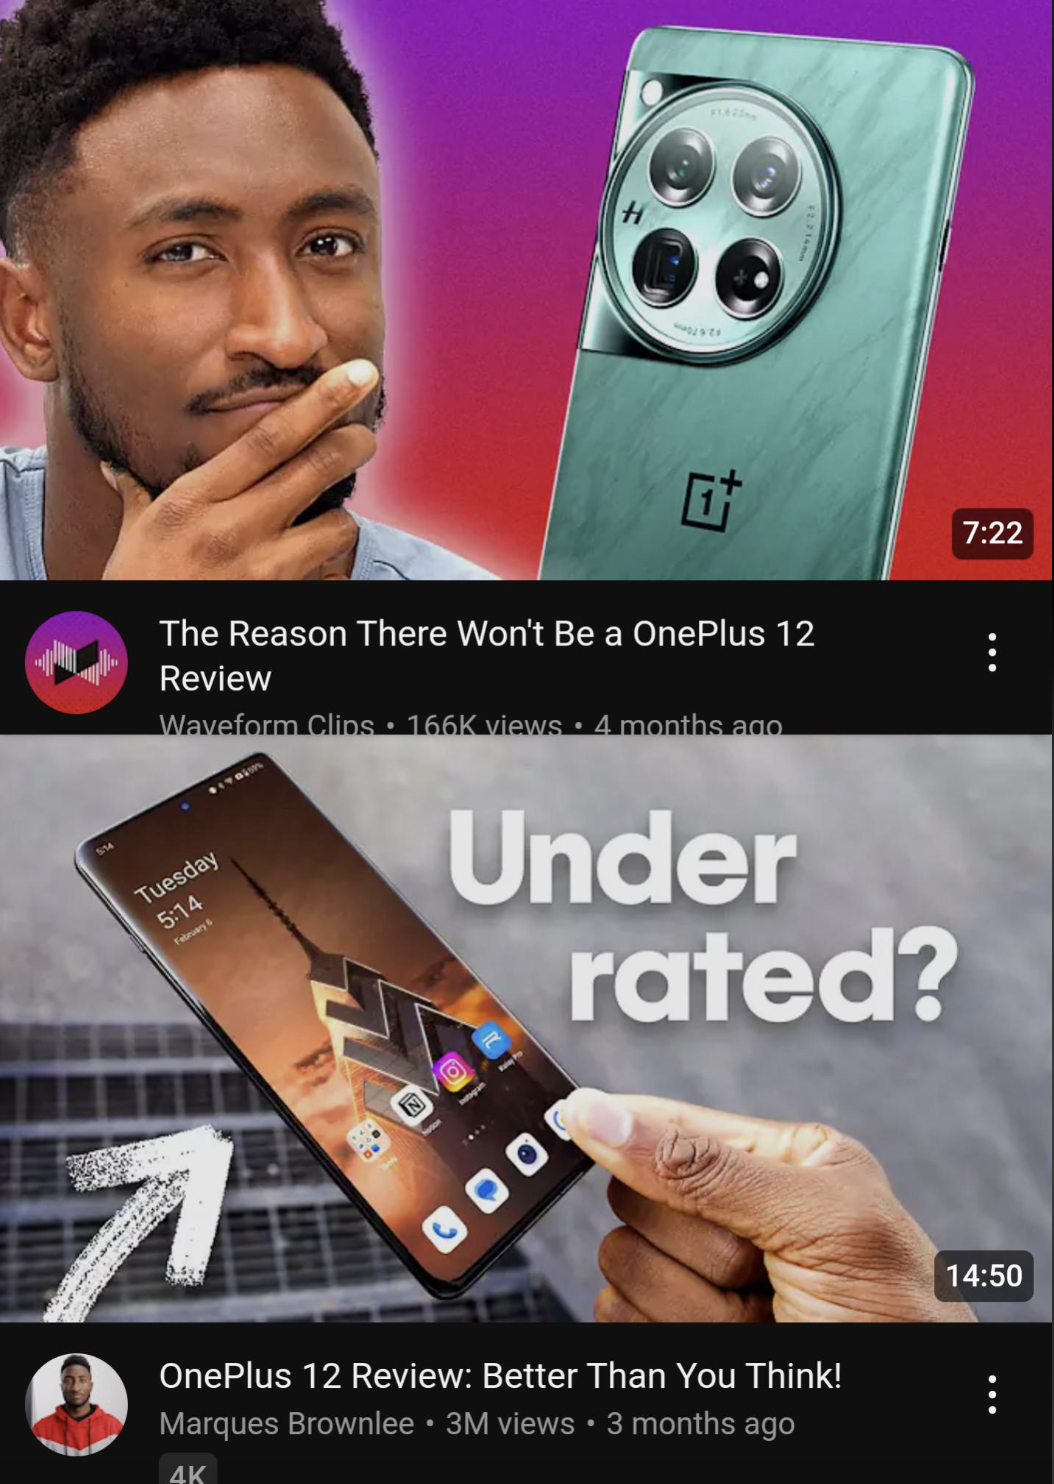 marques brownlee oneplus 12 - The Reason There Won't Be a OnePlus 12 Review Waveform Clins. views 4 months ano Tuesday 514 Under rated? OnePlus 12 Review Better Than You Think! Marques Brownlee 3M views 3 months ago Ak